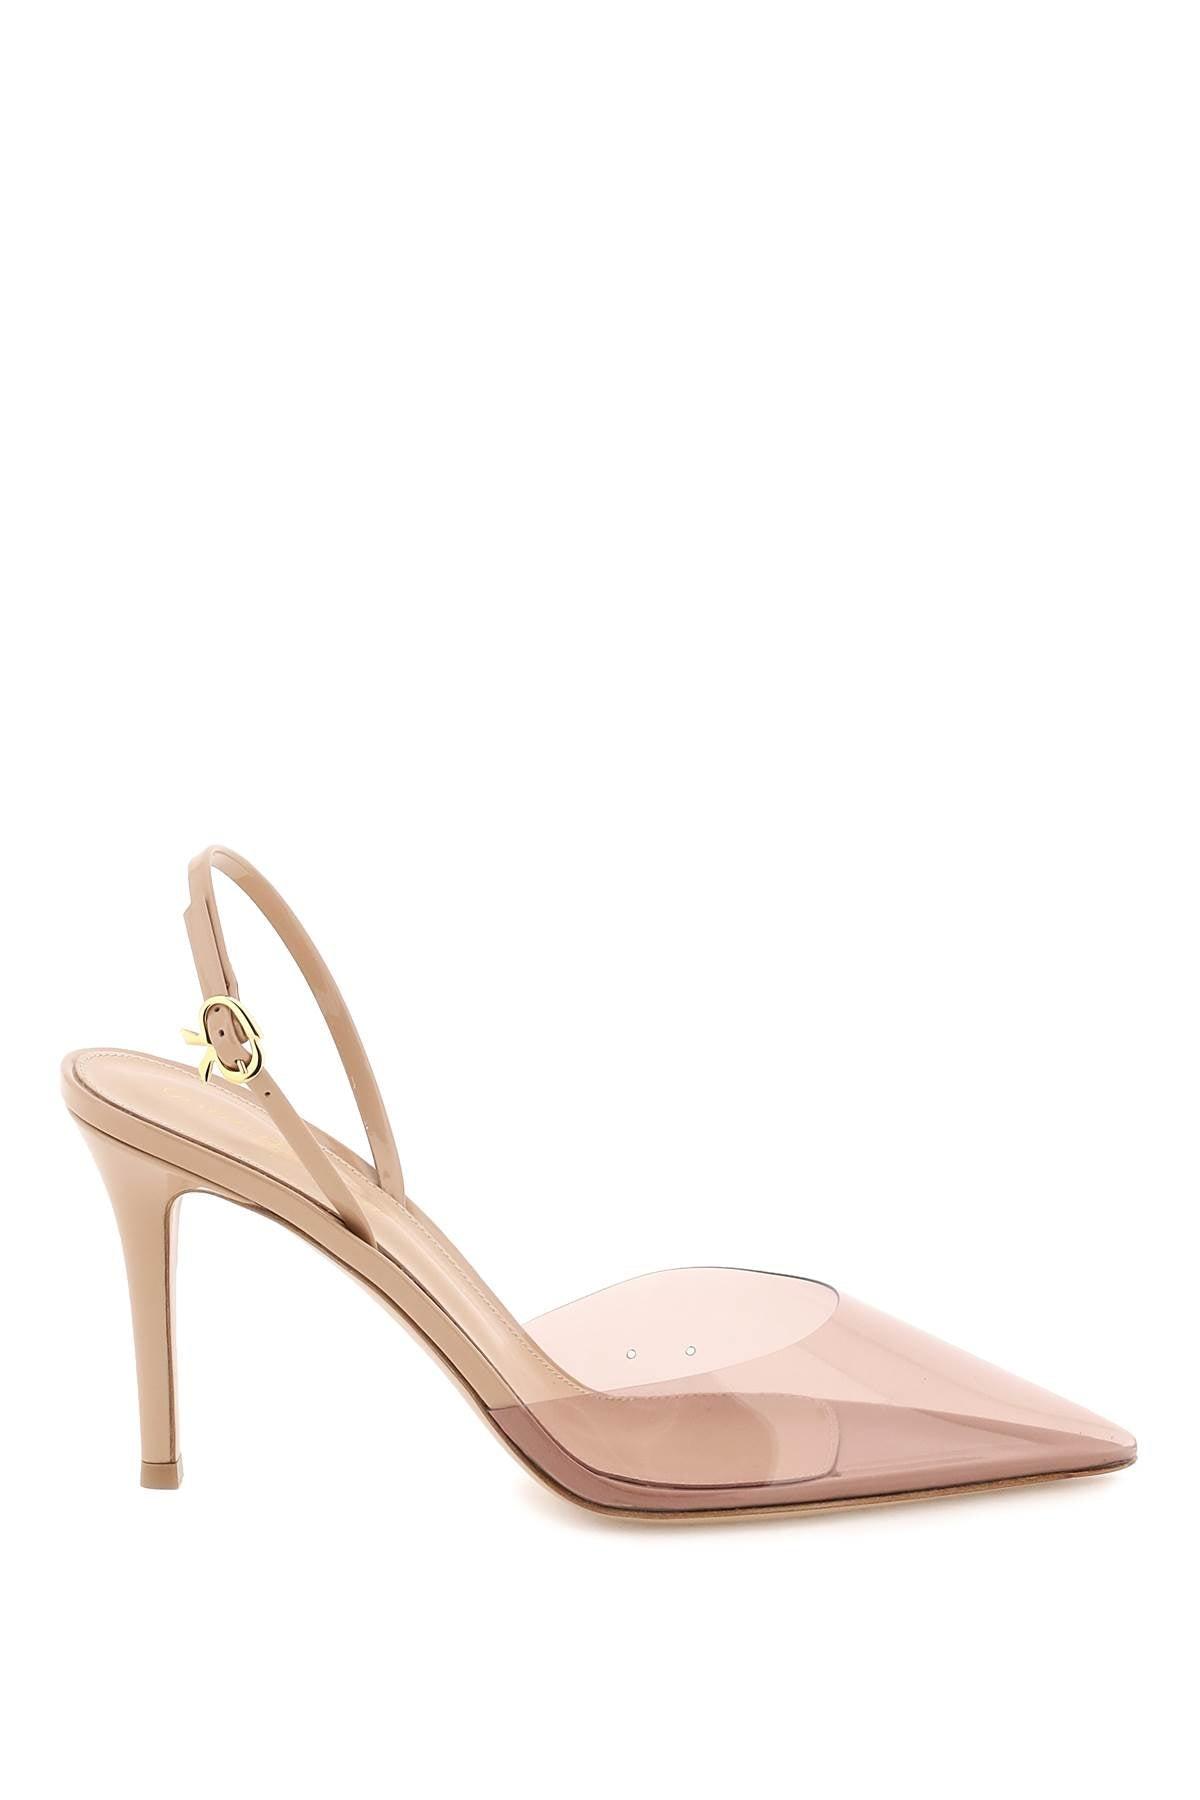 Gianvito Rossi Ribbon D'orsay Slingback Pumps in Pink | Lyst